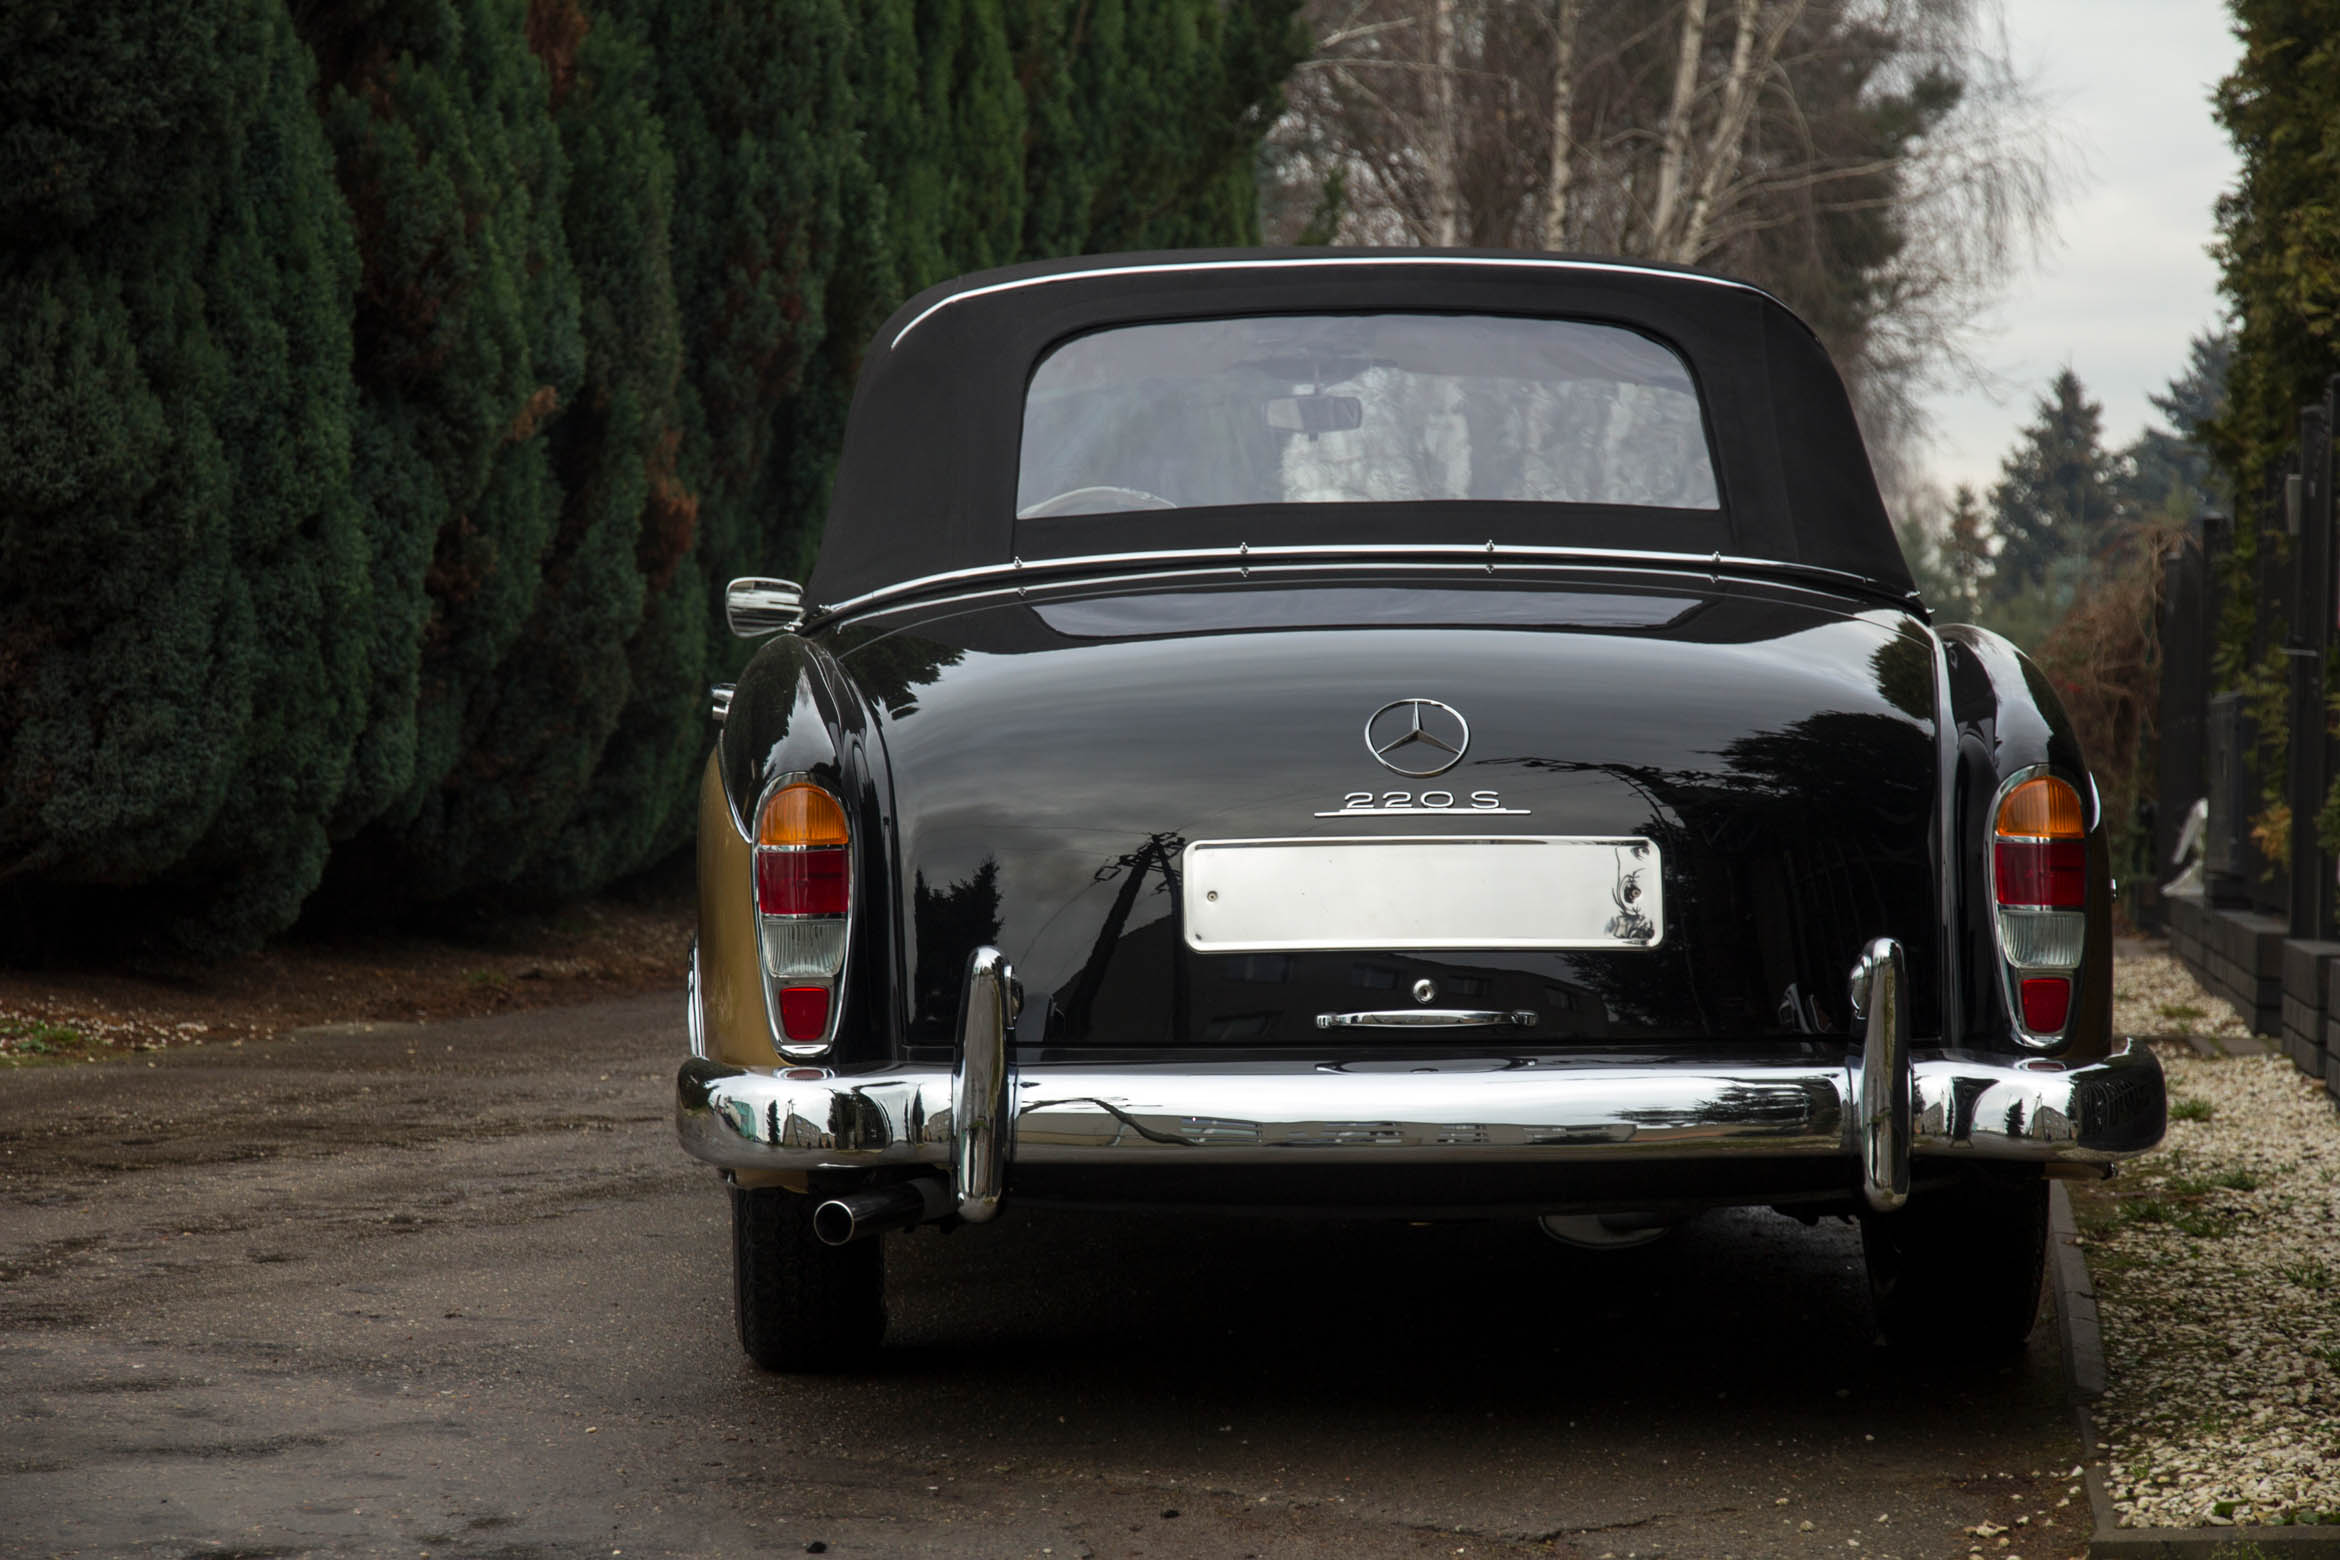 Mercedes 220 S Coupe